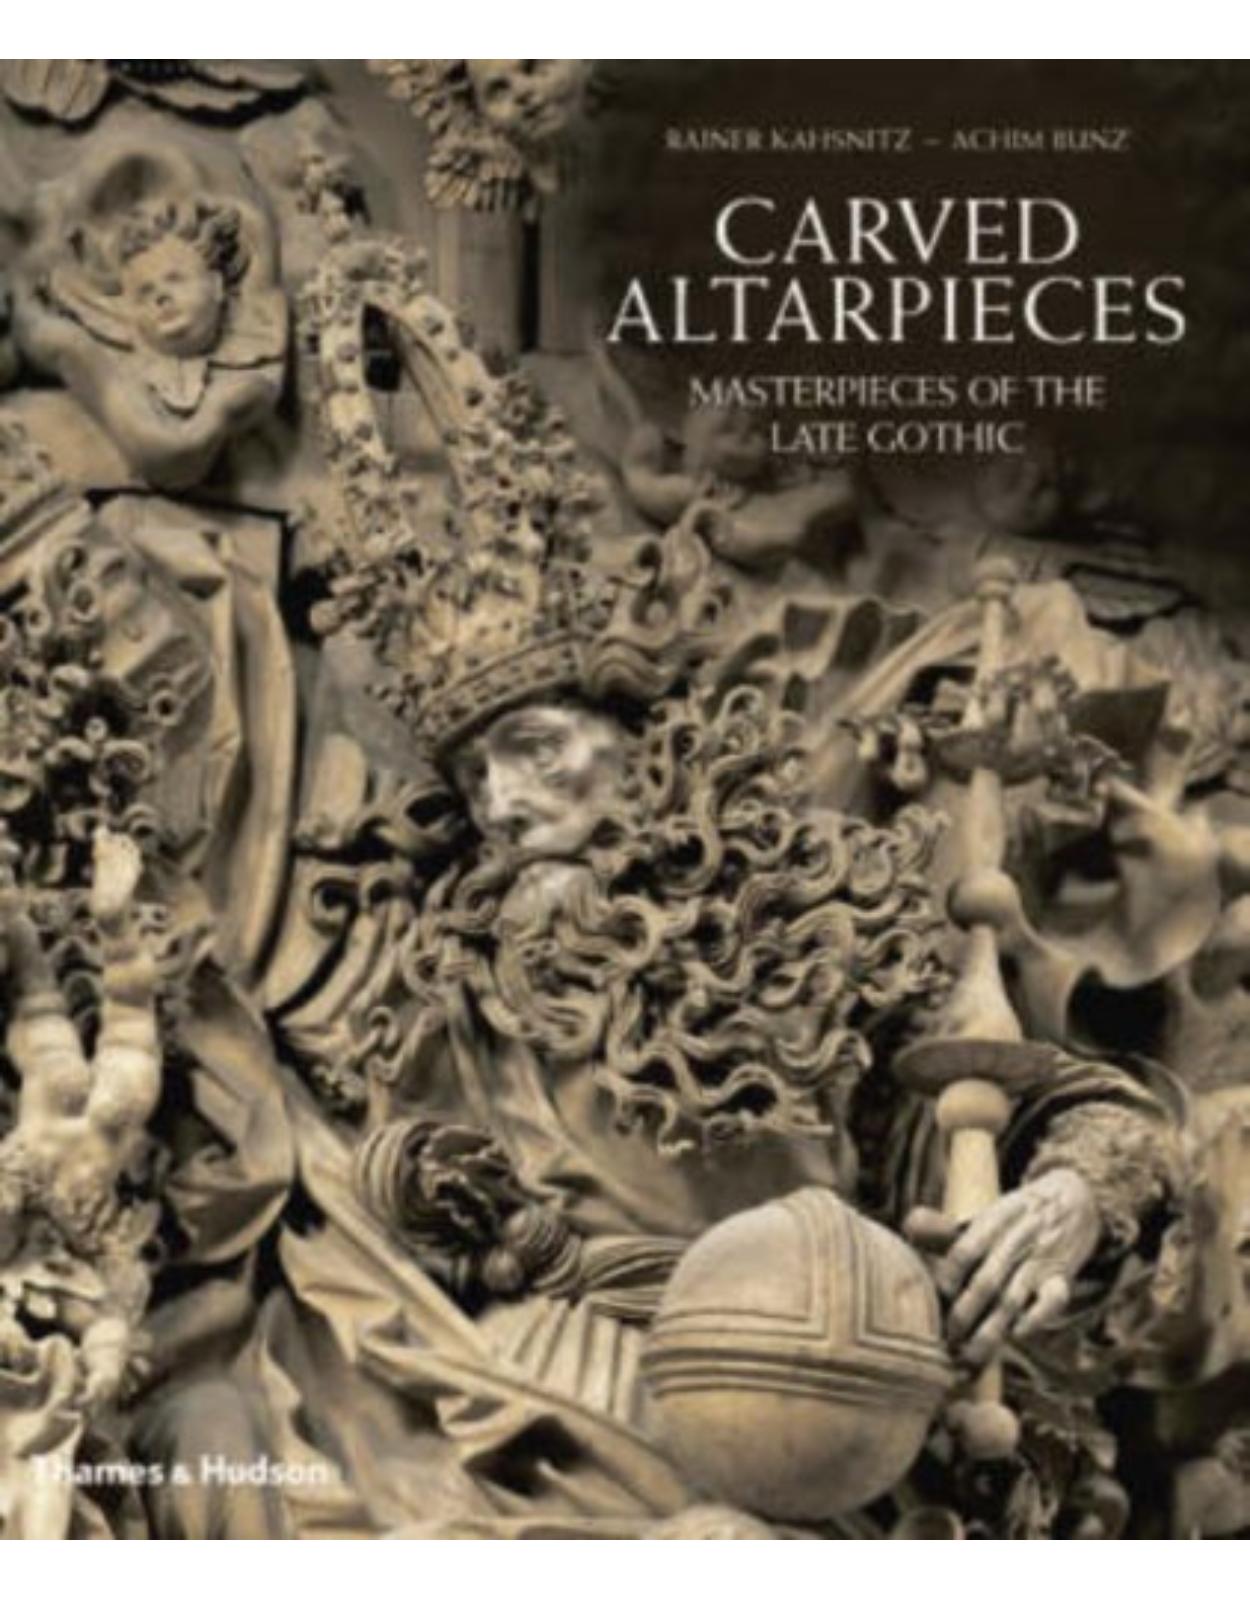 Carved Altarpieces: Masterpieces of the Late Gothic